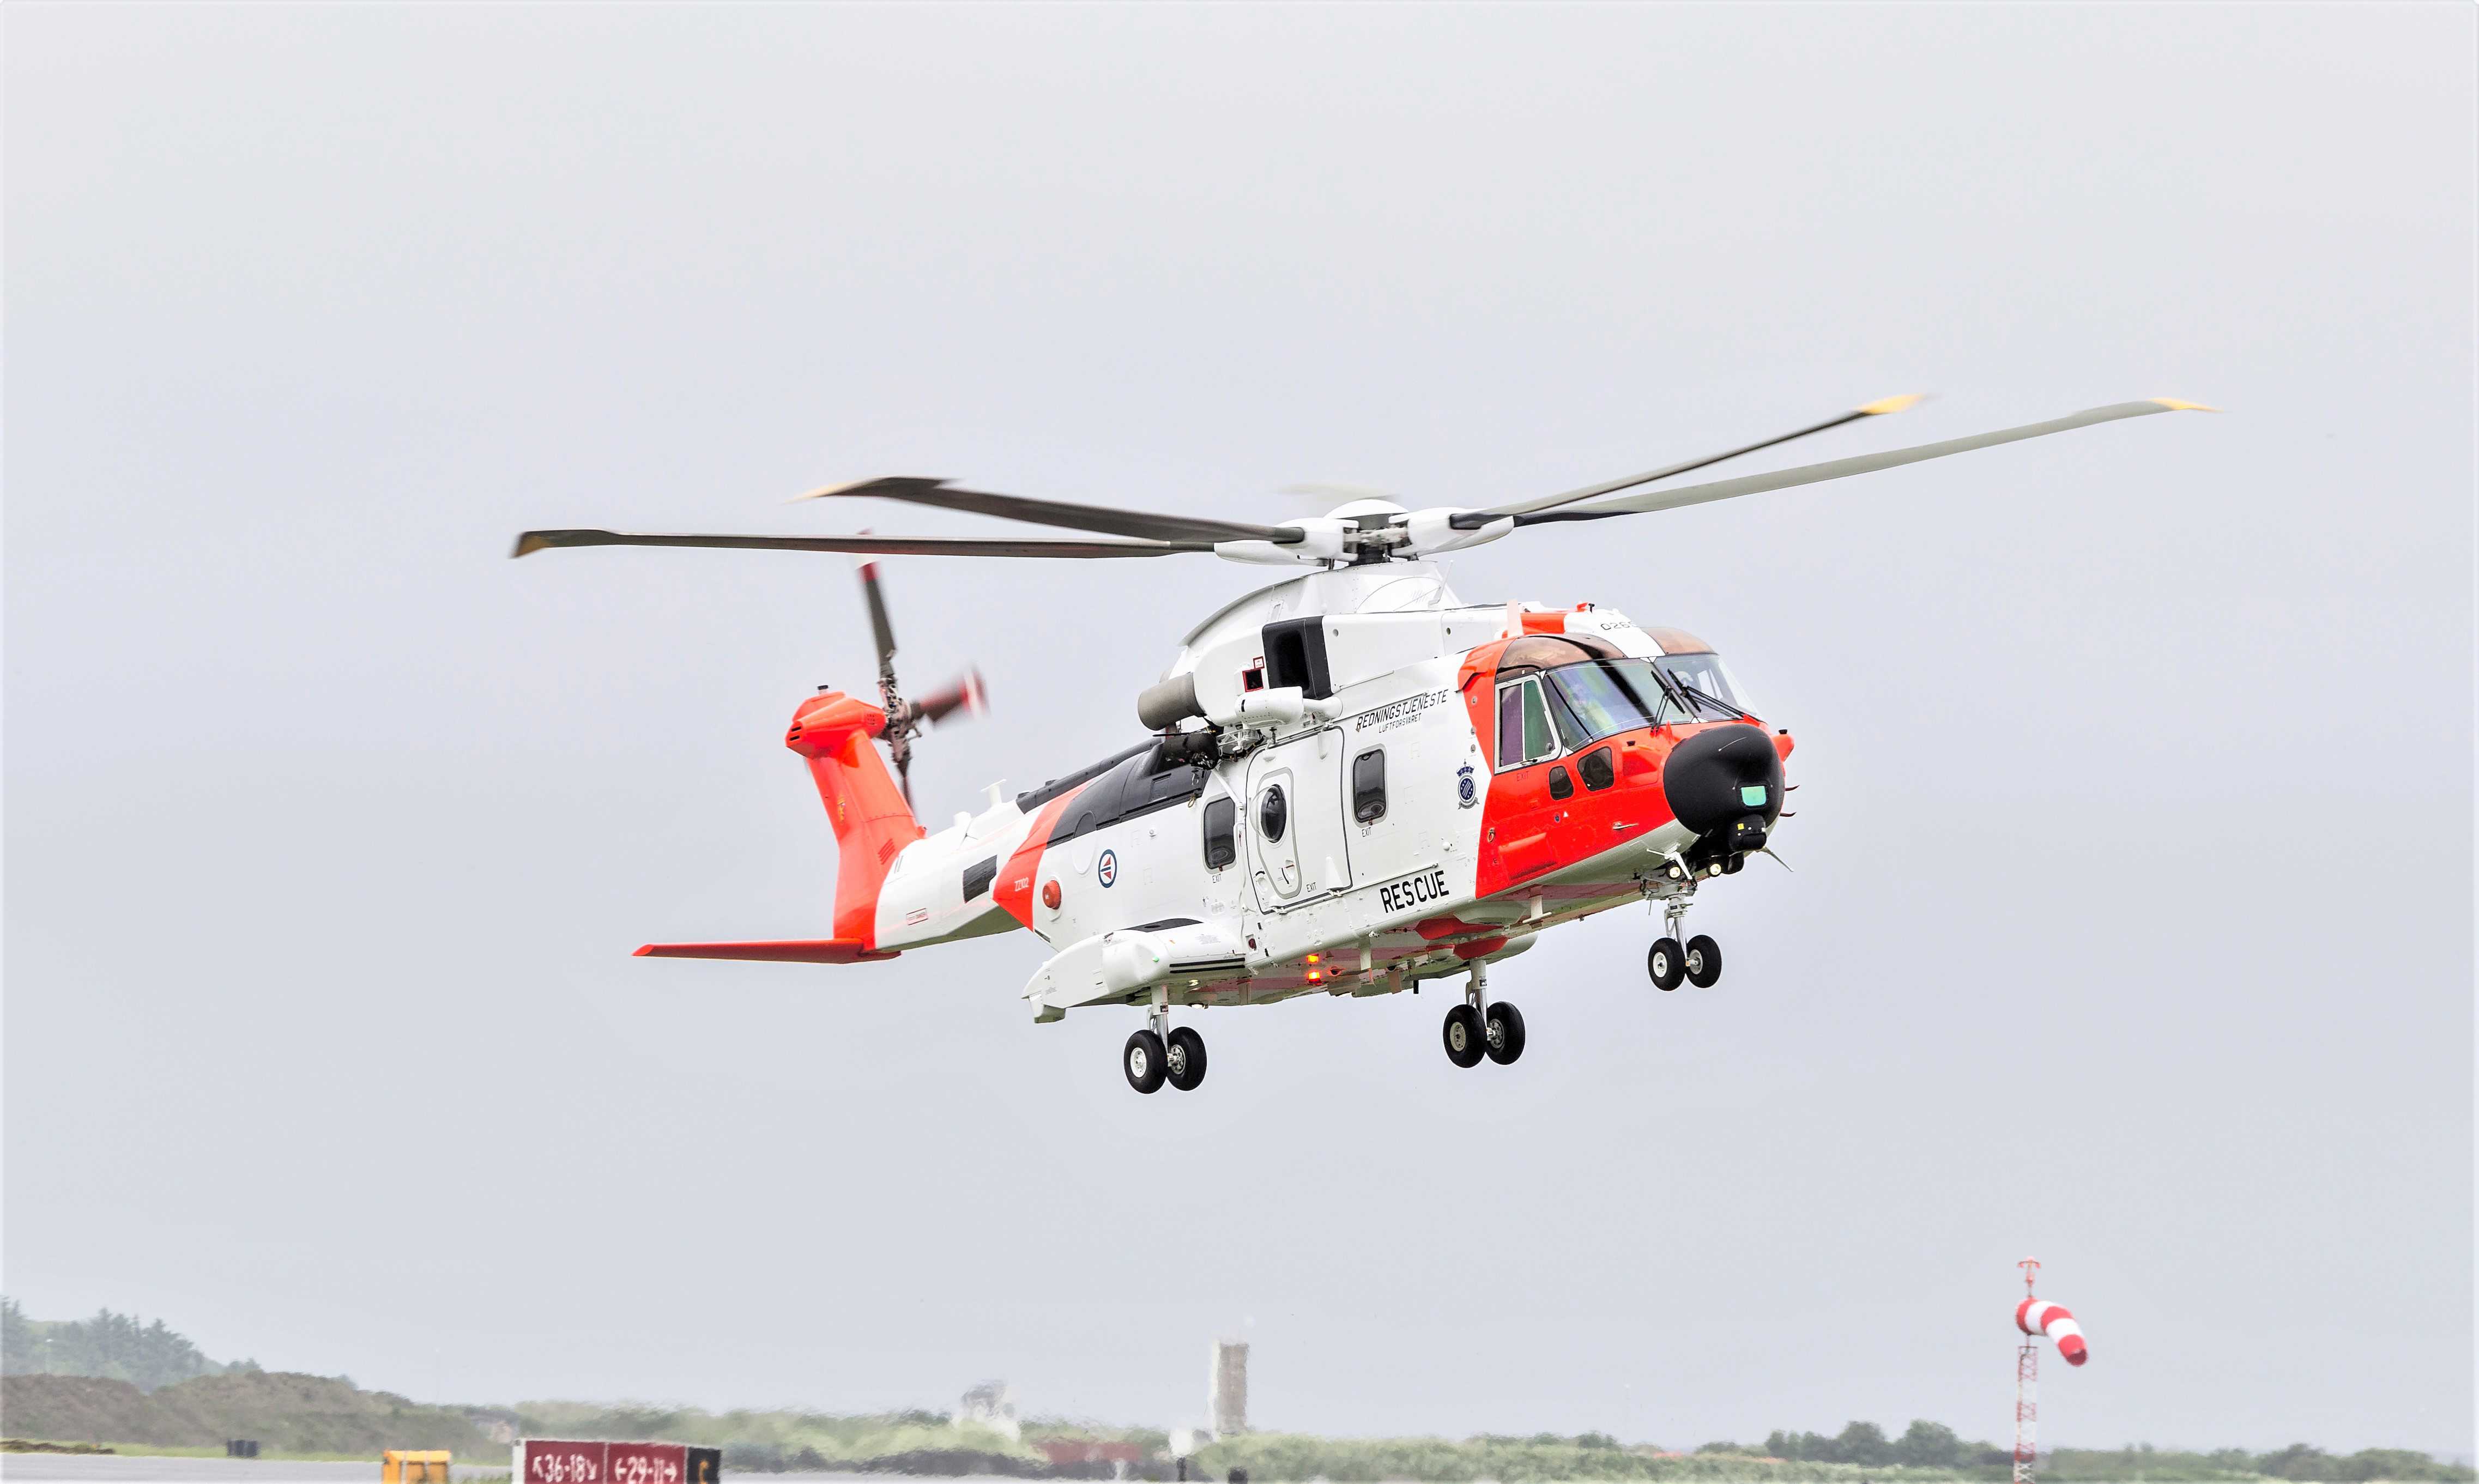 AW101 rescue helicopter in air